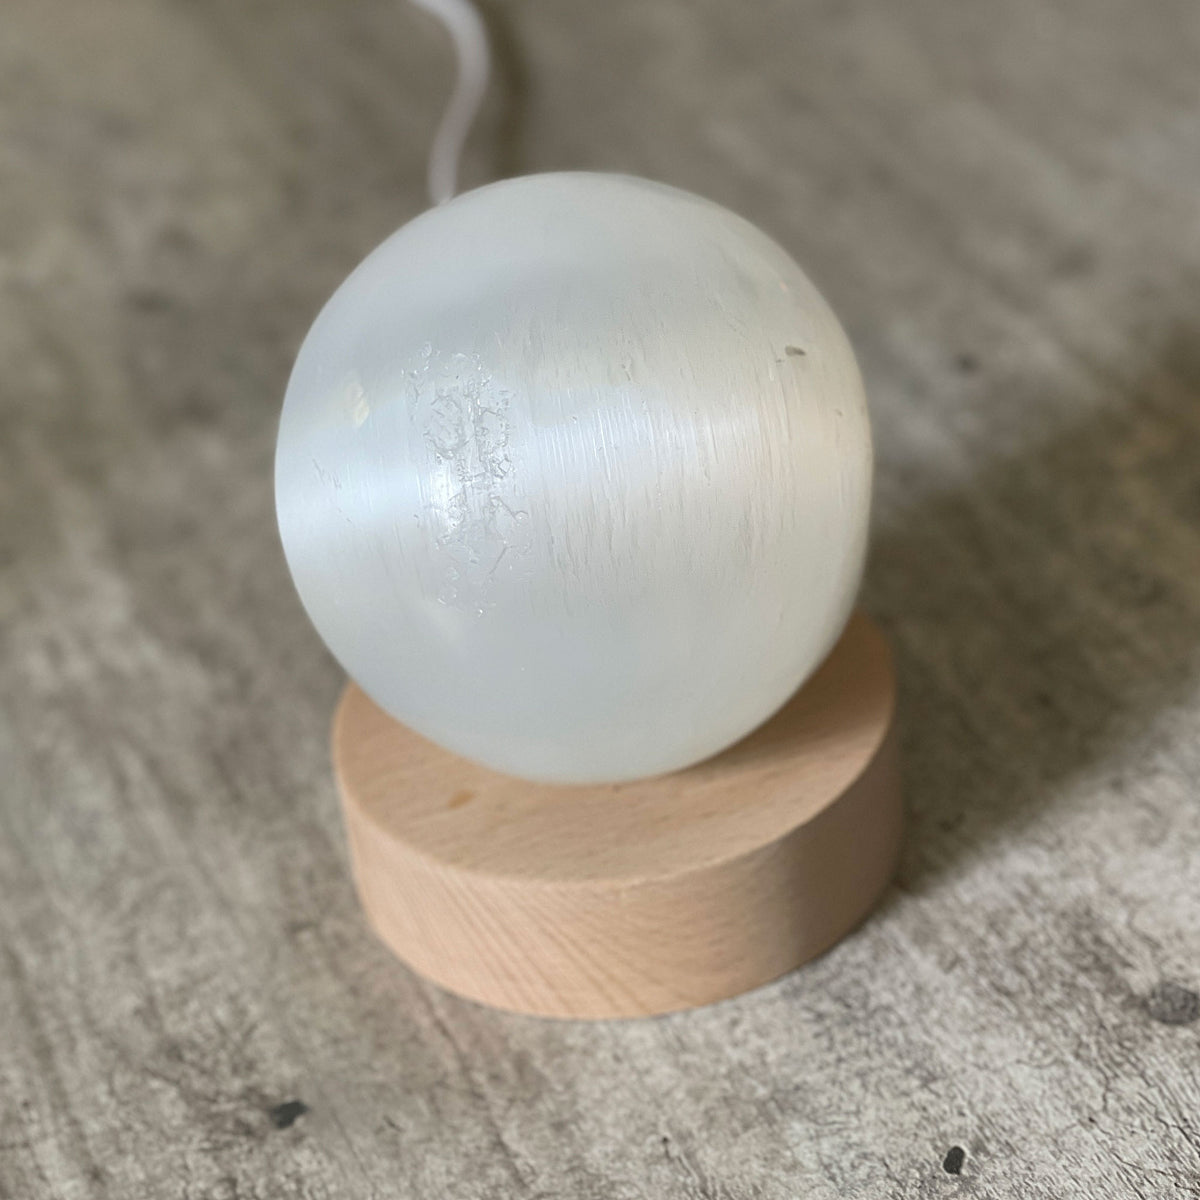 Selenite Lamp - Sphere - Selenite is a beautiful and versatile crystal that offers numerous benefits, making it a popular choice for both decor and holistic purposes. Its natural beauty and unique translucent appearance make it an eye-catching addition to any home.